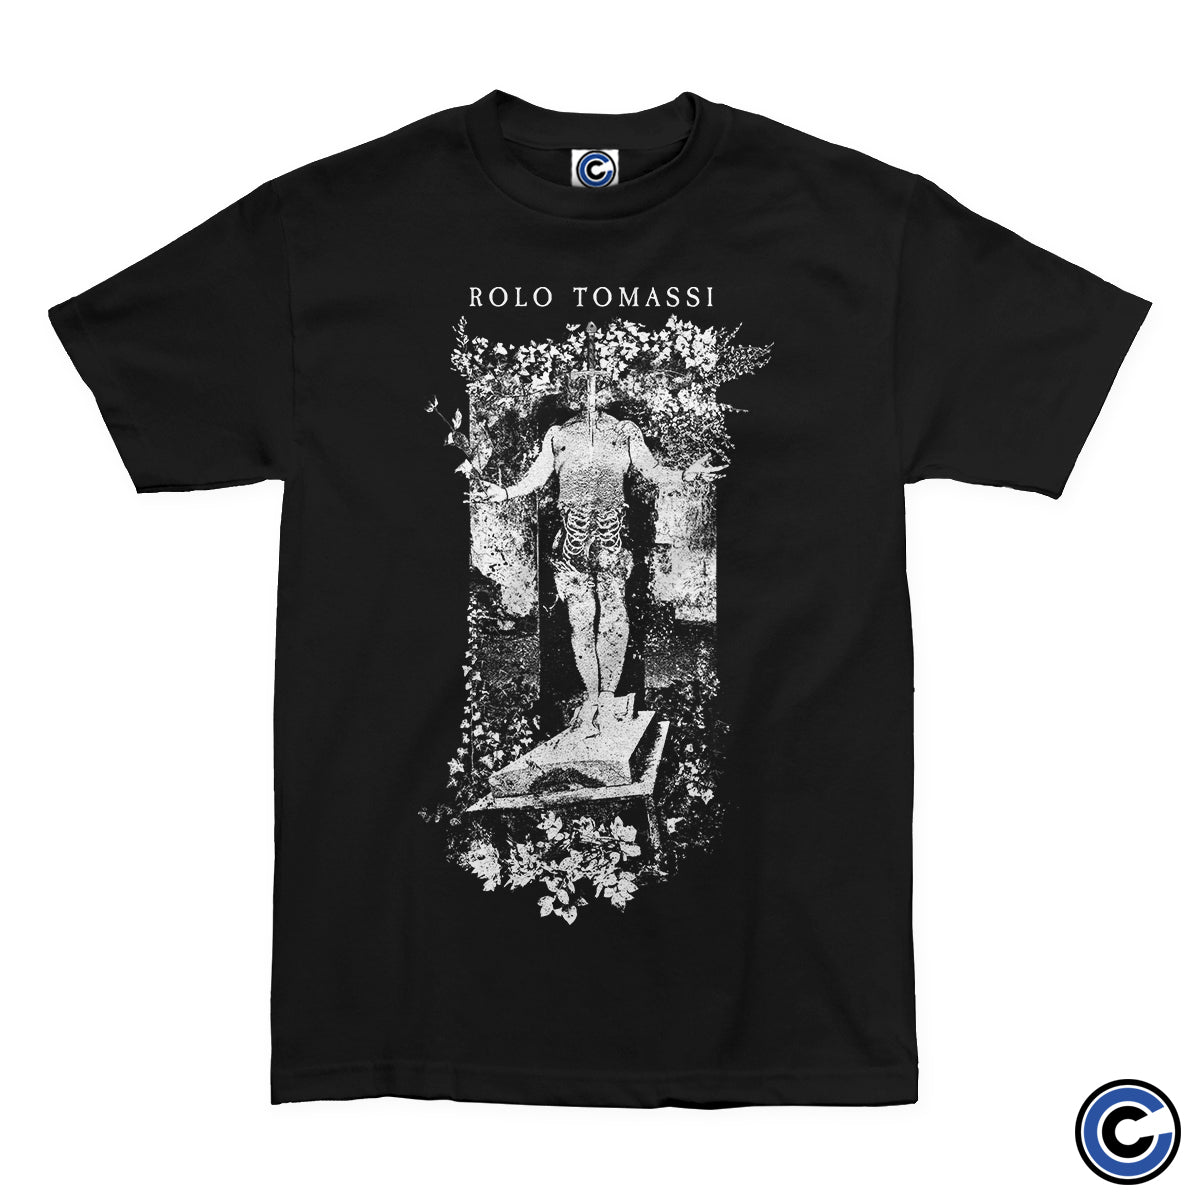 Rolo Tomassi "Flowers" Shirt